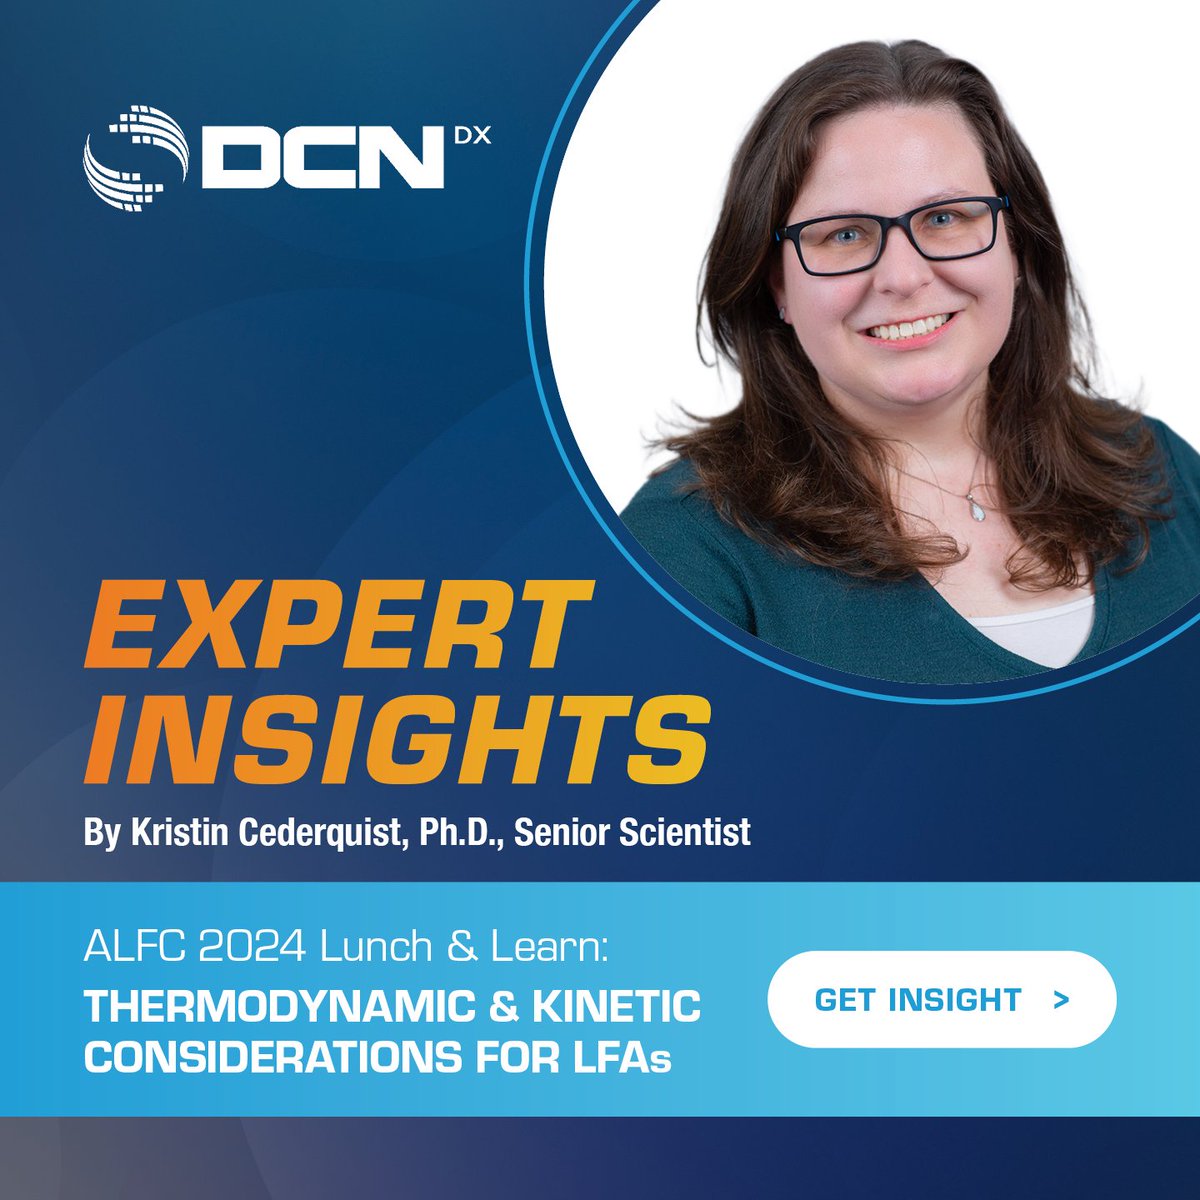 Watch Dr. Kristin Cederquist's insightful #ALFC2024 session on the roles of thermodynamics & kinetics in #LFA design. 🔬💡

Optimize your #LateralFlow #Assays with expert insights from #DCNDx.

Full video: hubs.ly/Q02tws1B0

#Diagnostics #IVD #SharingKnowledge